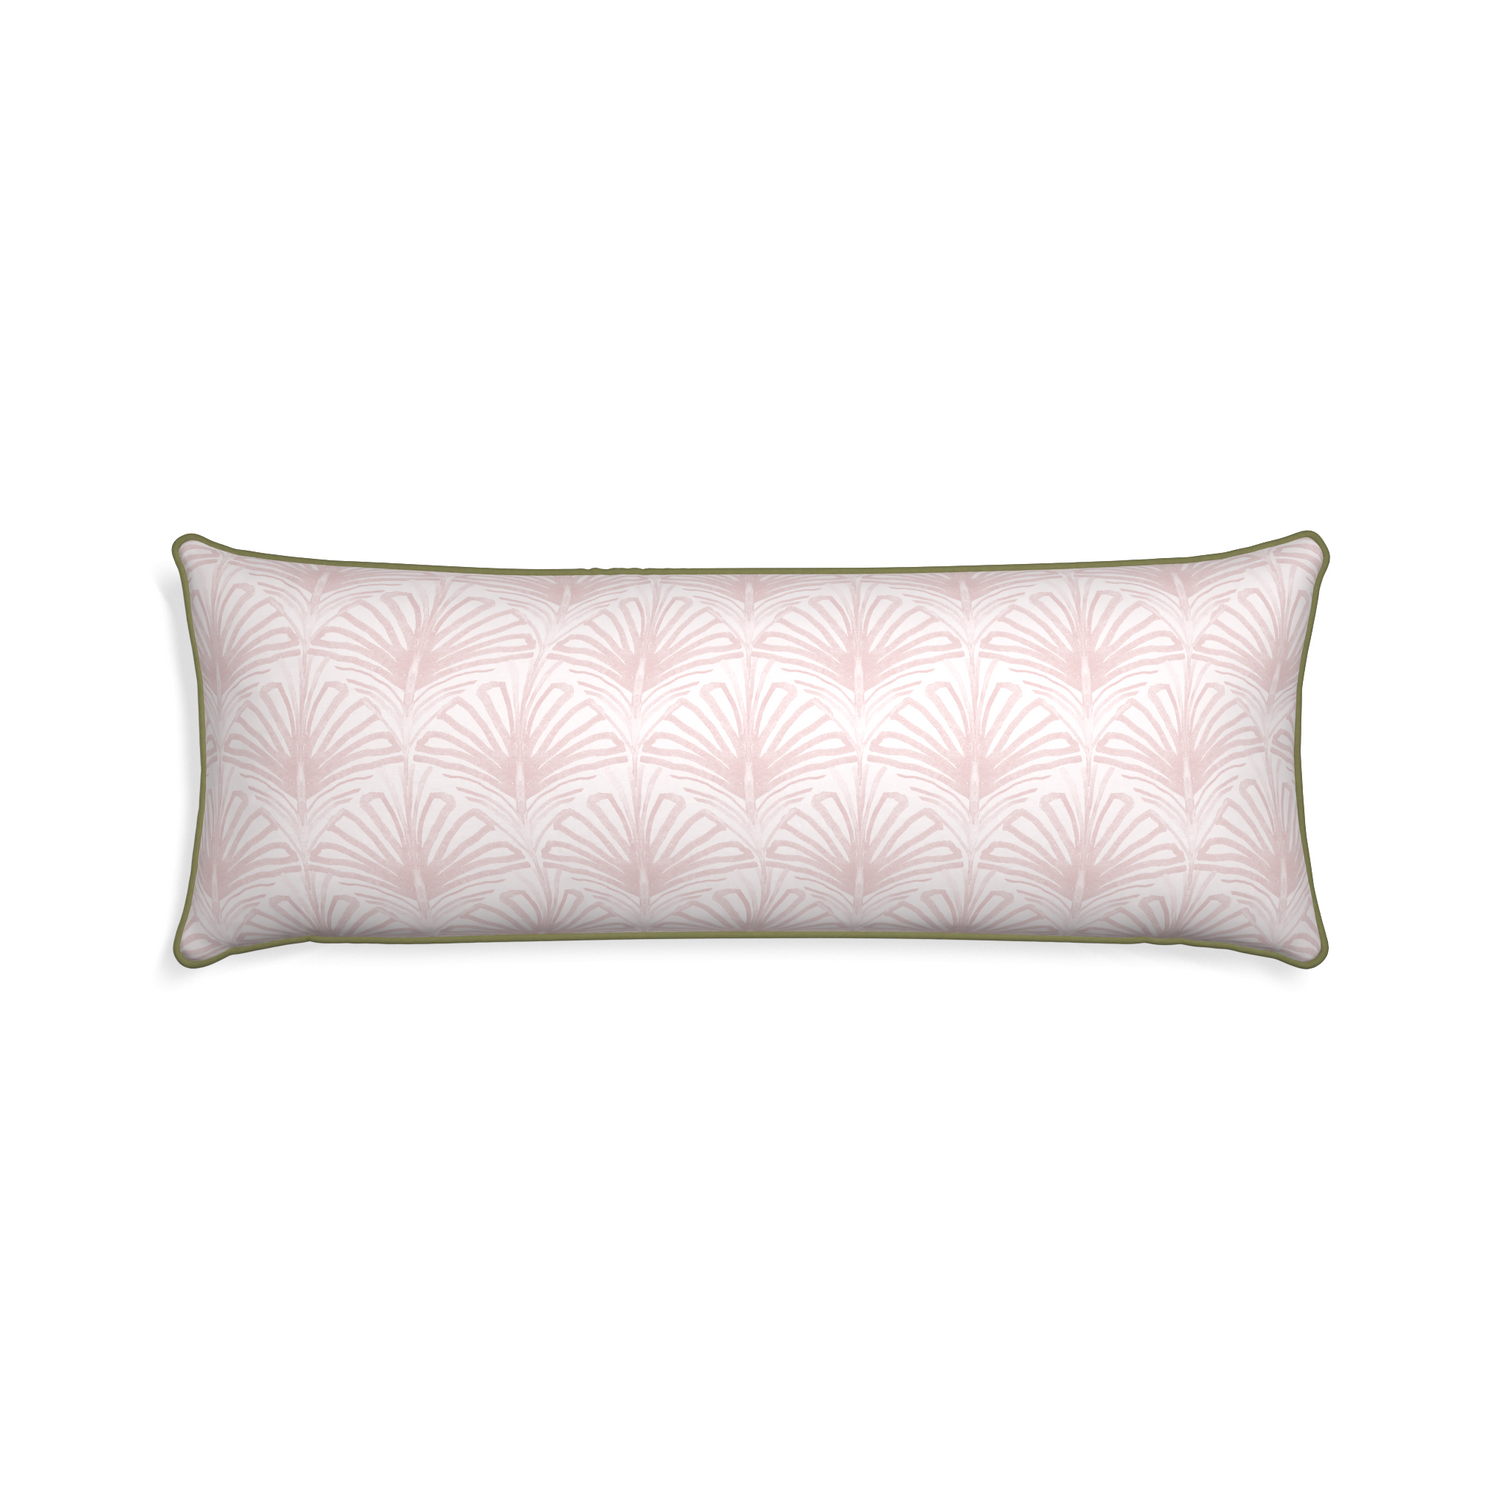 Xl-lumbar suzy rose custom pillow with moss piping on white background